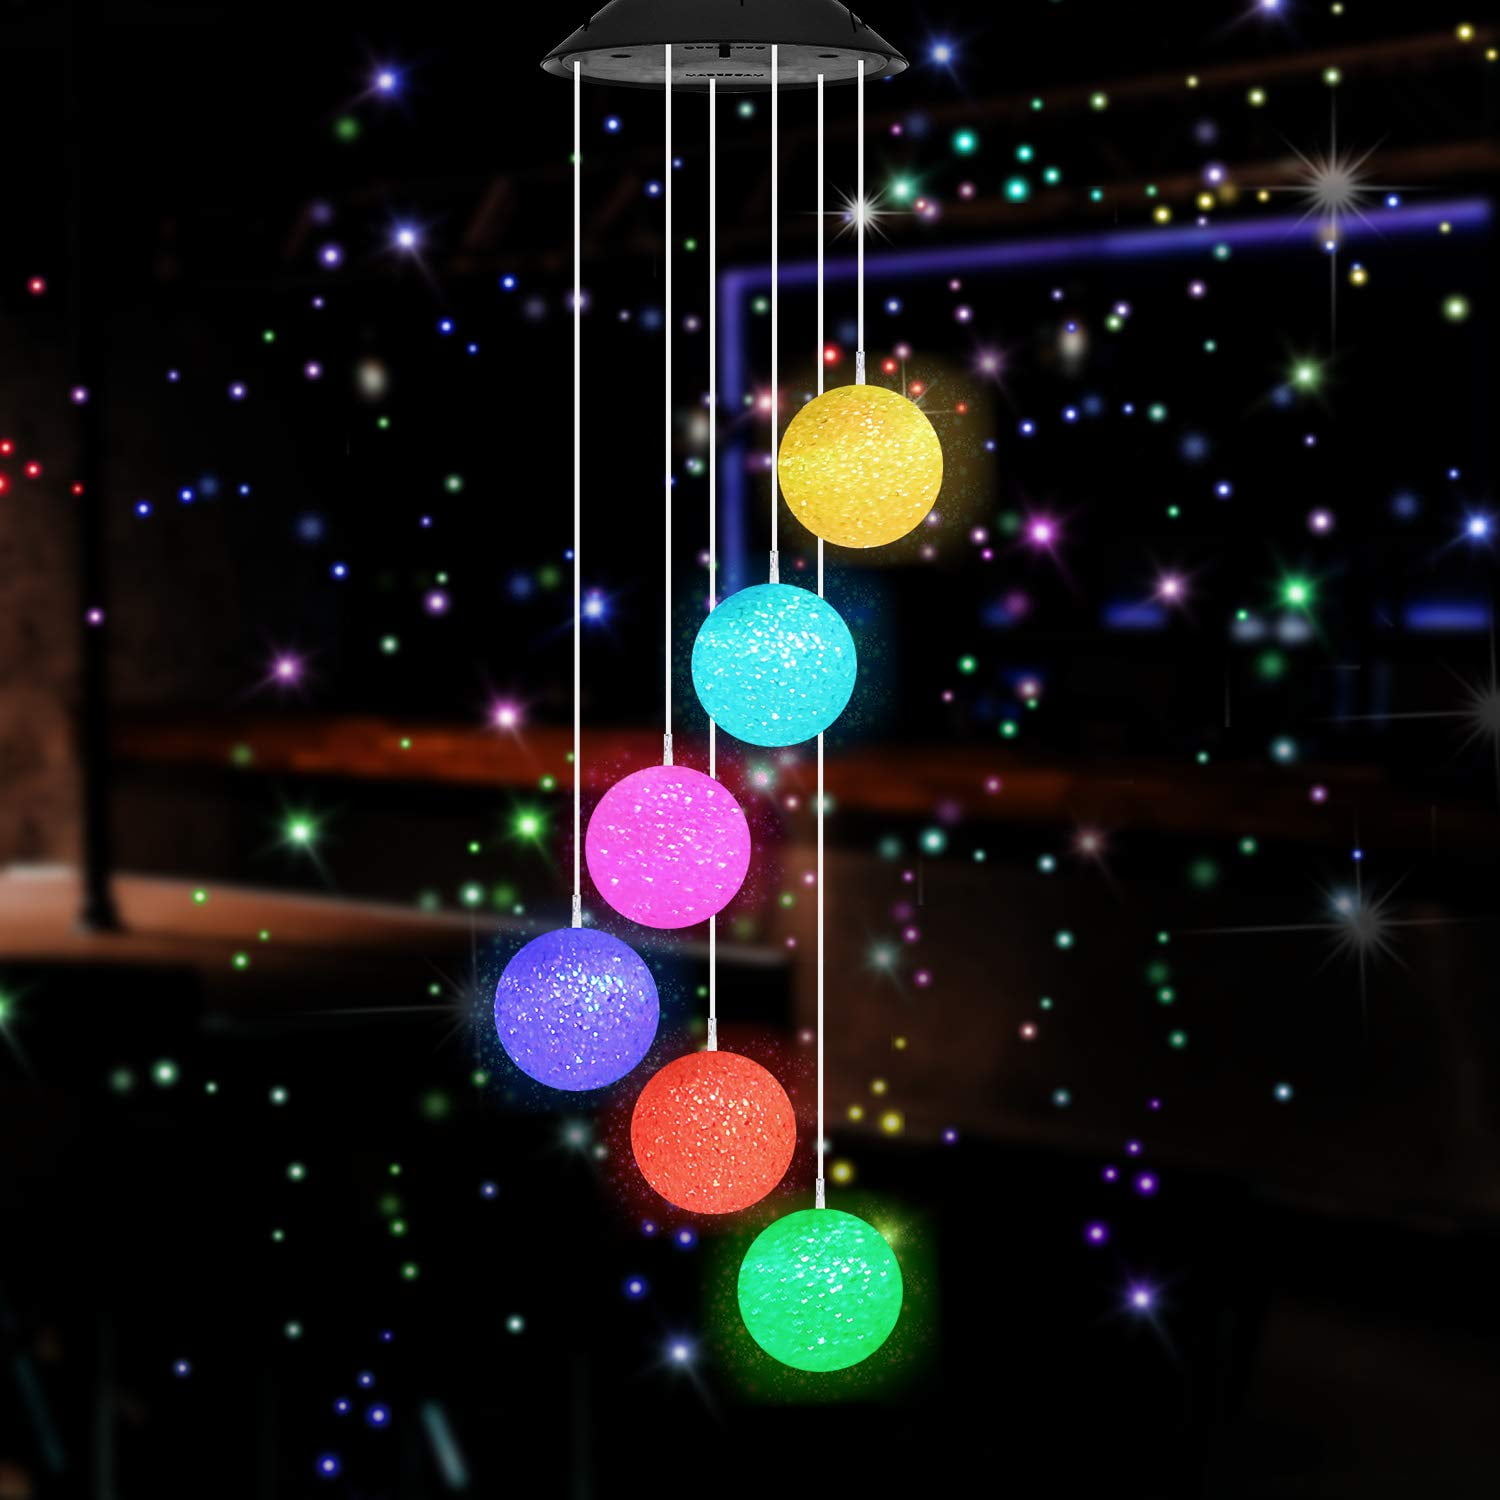 Vinkki Solar Wind Chime Color Changing Solar Light Moon Star LED Wind Chime Wind Mobile Portable Waterproof Outdoor Decorative Romantic Wind Bell Light for Patio Yard Garden Home 